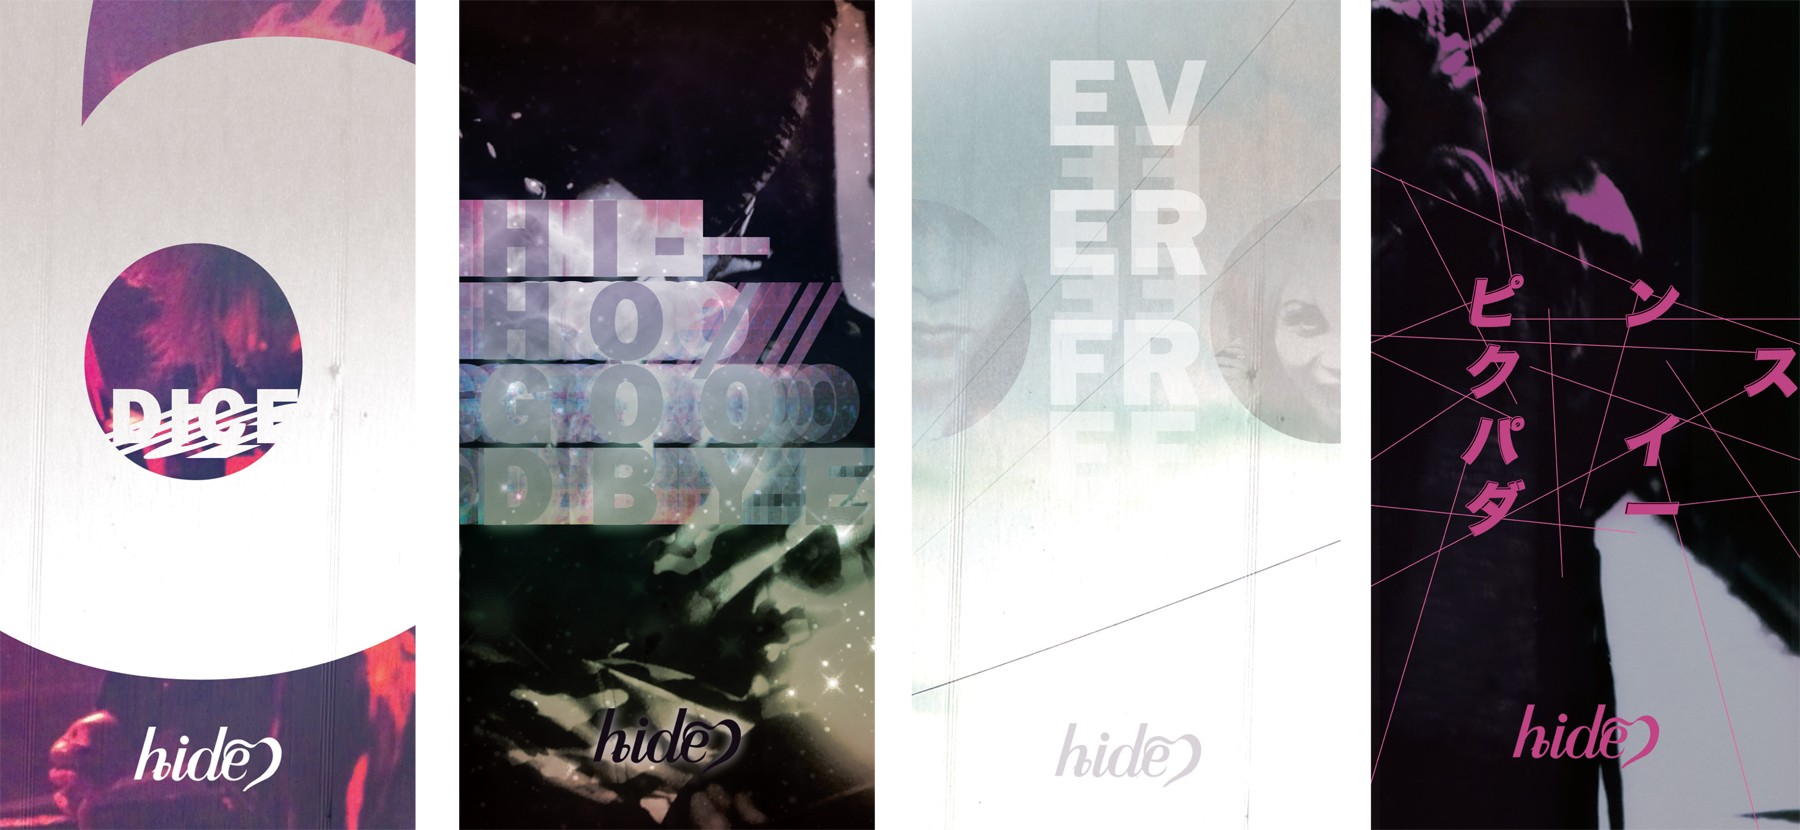 General 1800x830 hide (musician) collage artwork typography